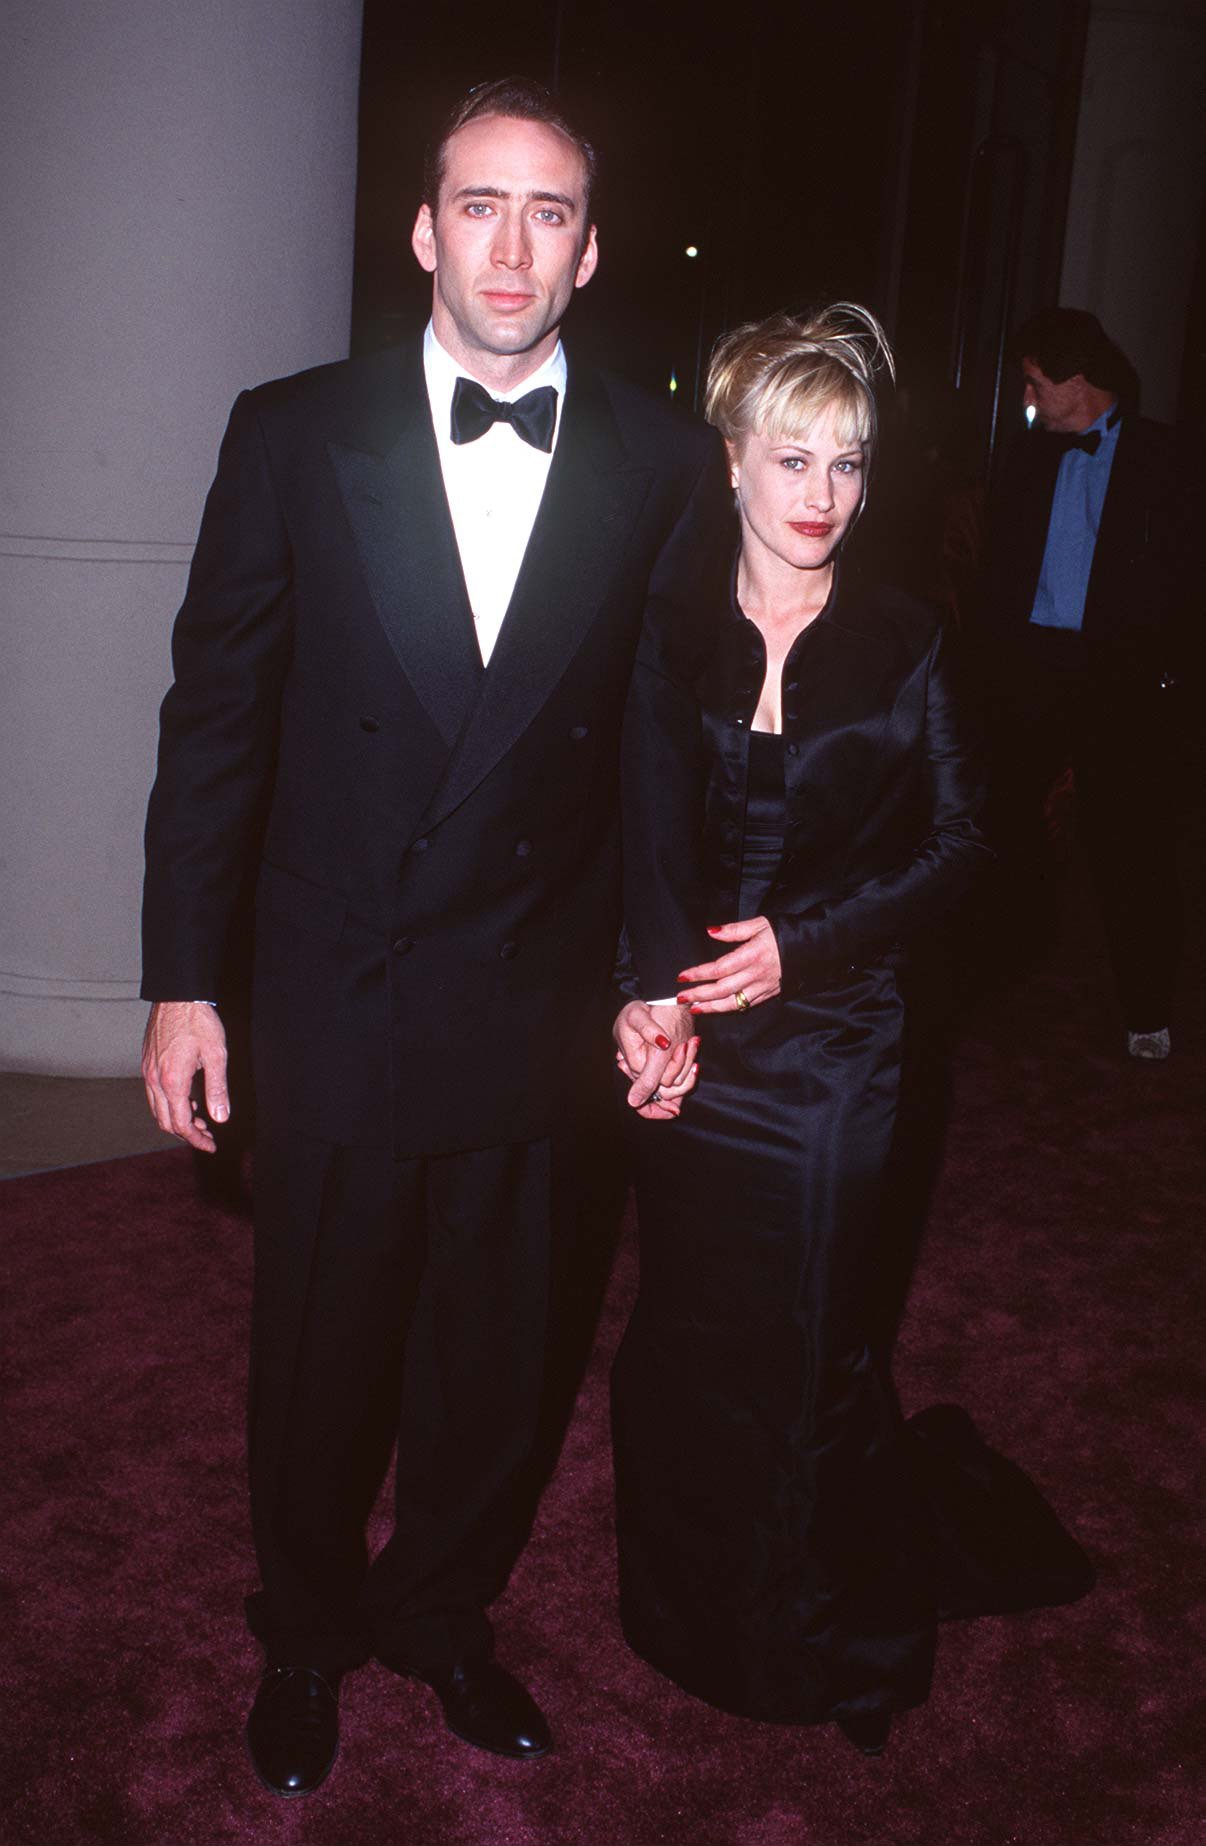 Nicolas Cage and Patricia Arquette at American Film Institute Honors Clint Eastwood in Beverly Hills, California, on February 29, 1996. | Source: SGranitz/WireImage/Getty Images